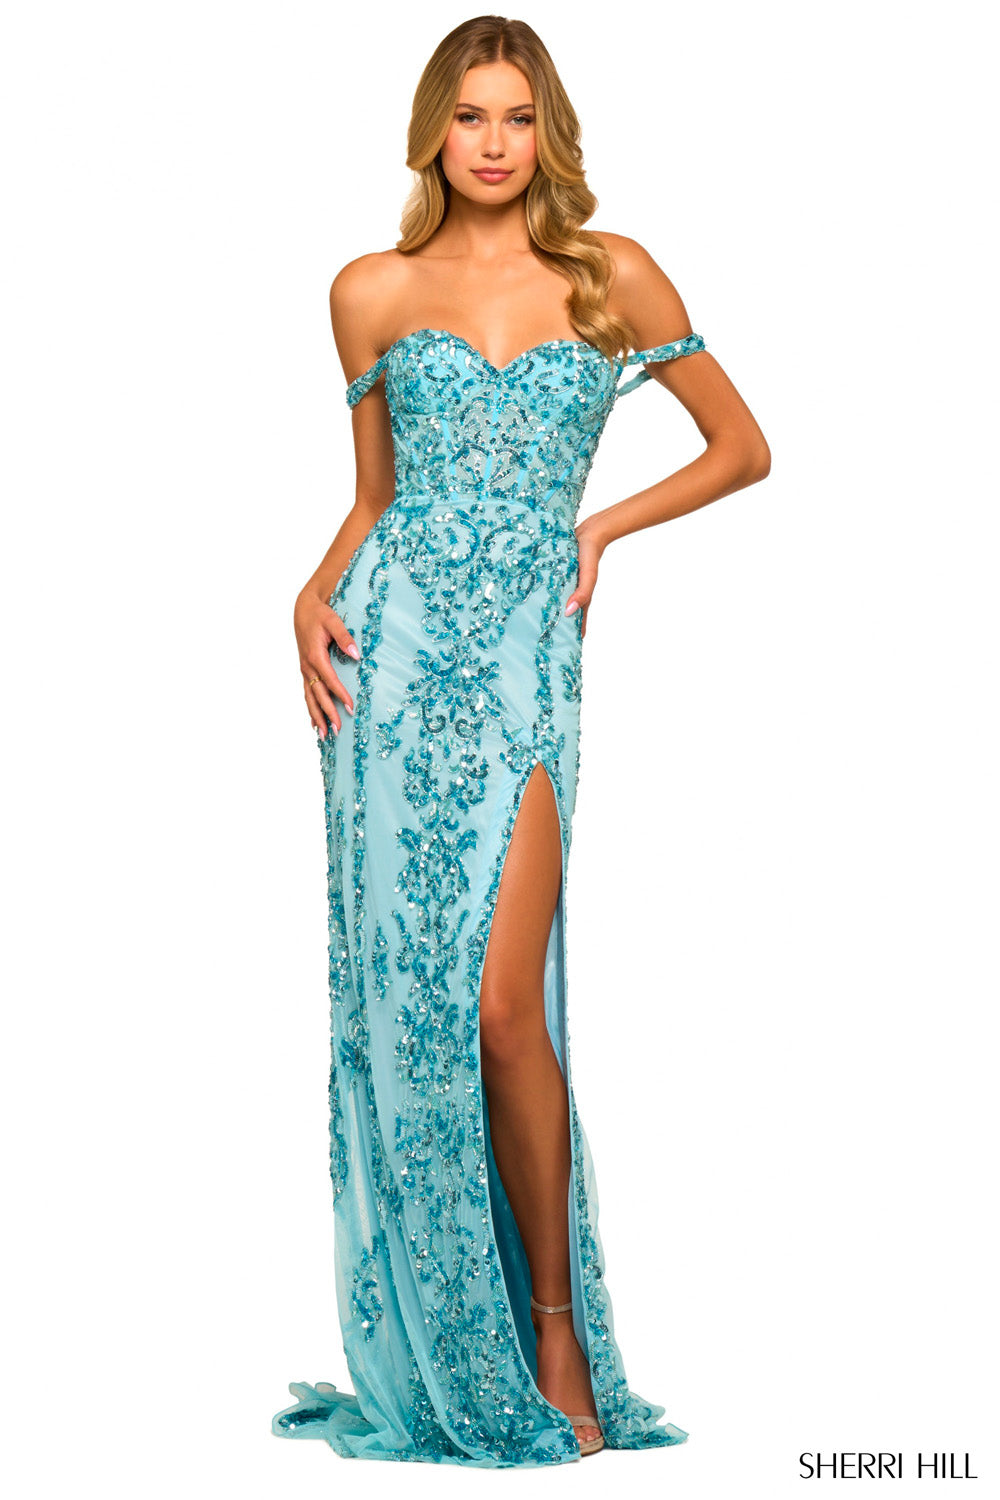 Sherri Hill Page 5 - Formal Approach